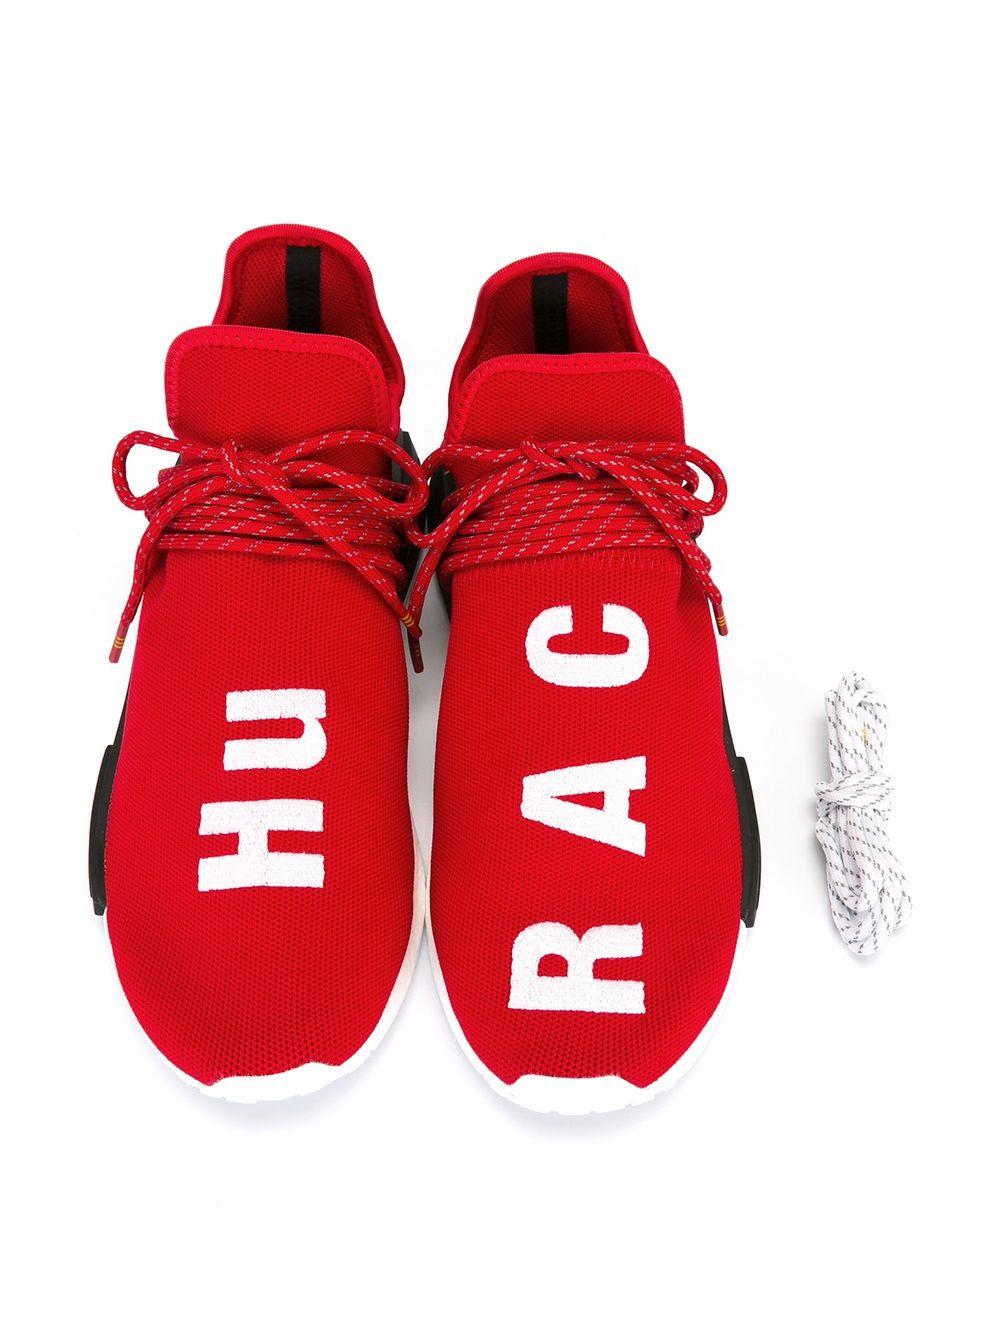 adidas Rubber Pharrell X Hu Nmd Red Human Race Sneakers for Men - Lyst